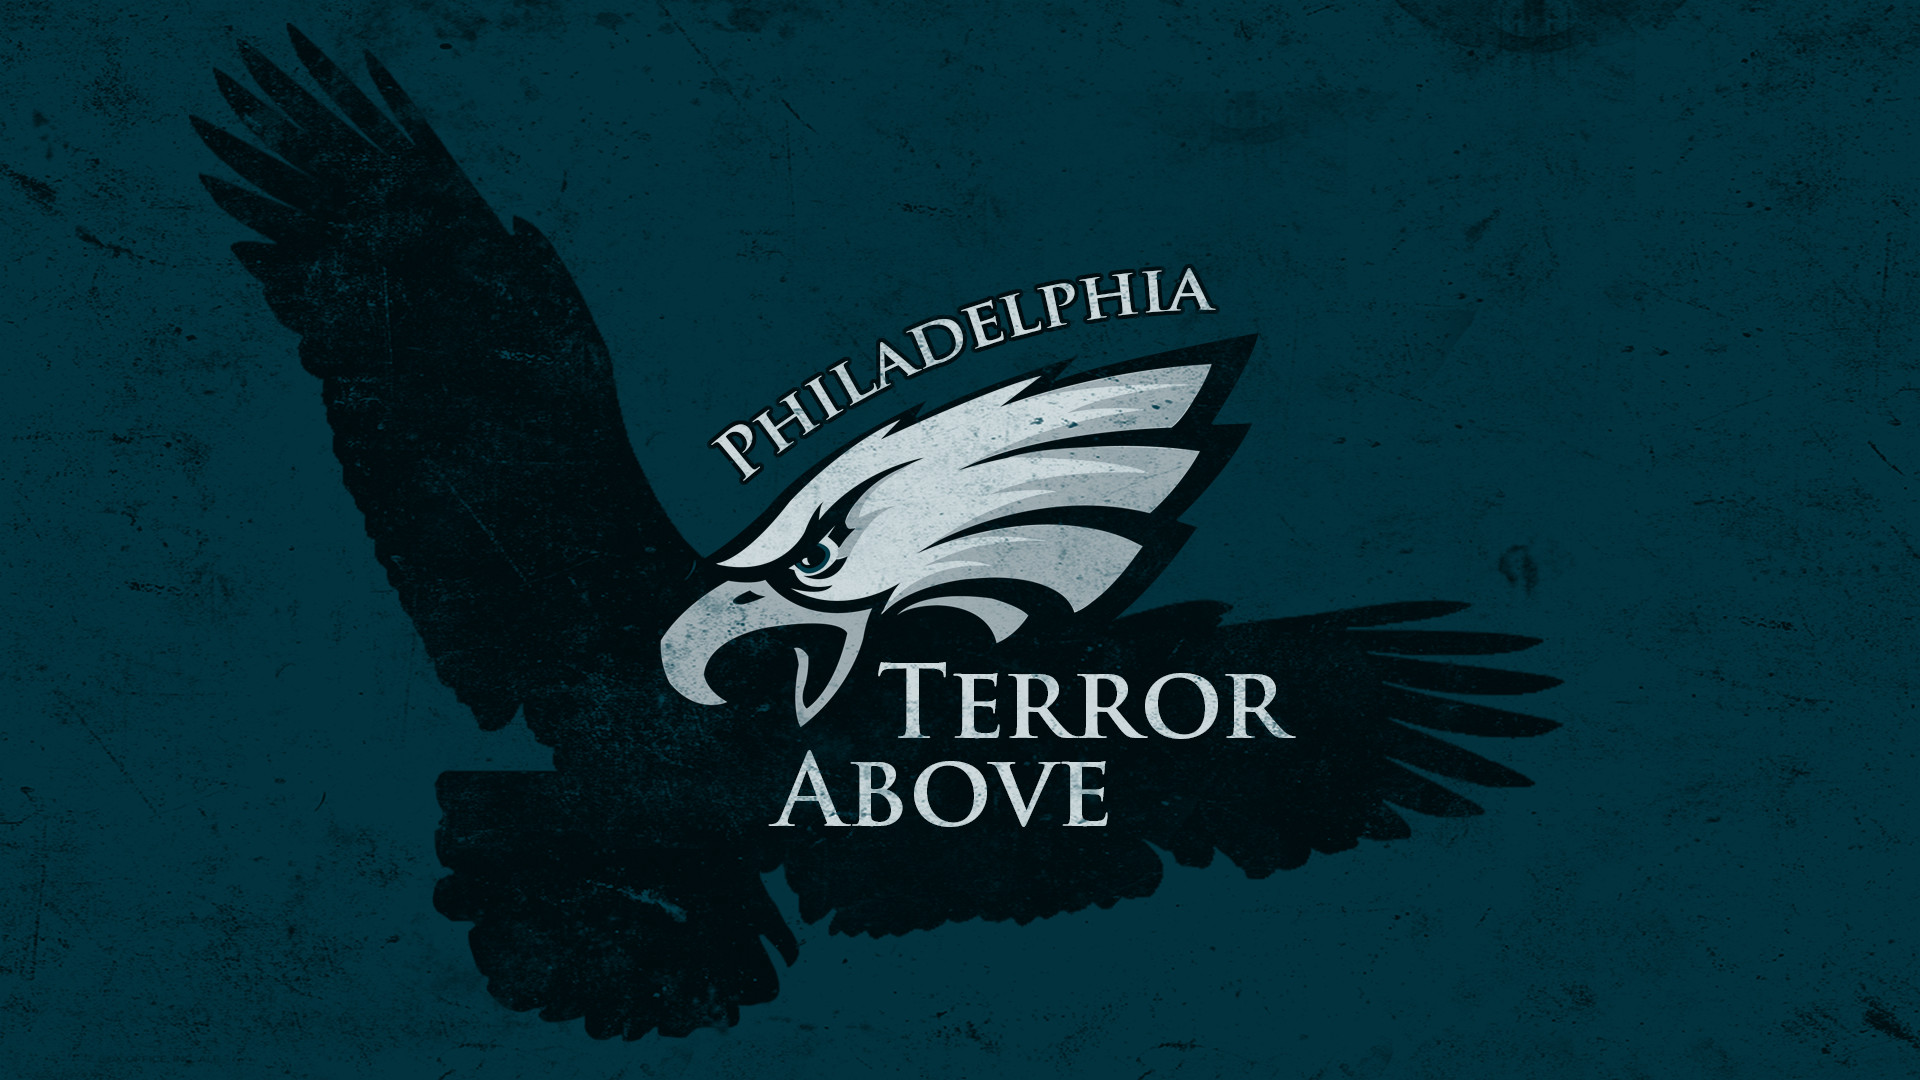 Philly eagles wallpaper